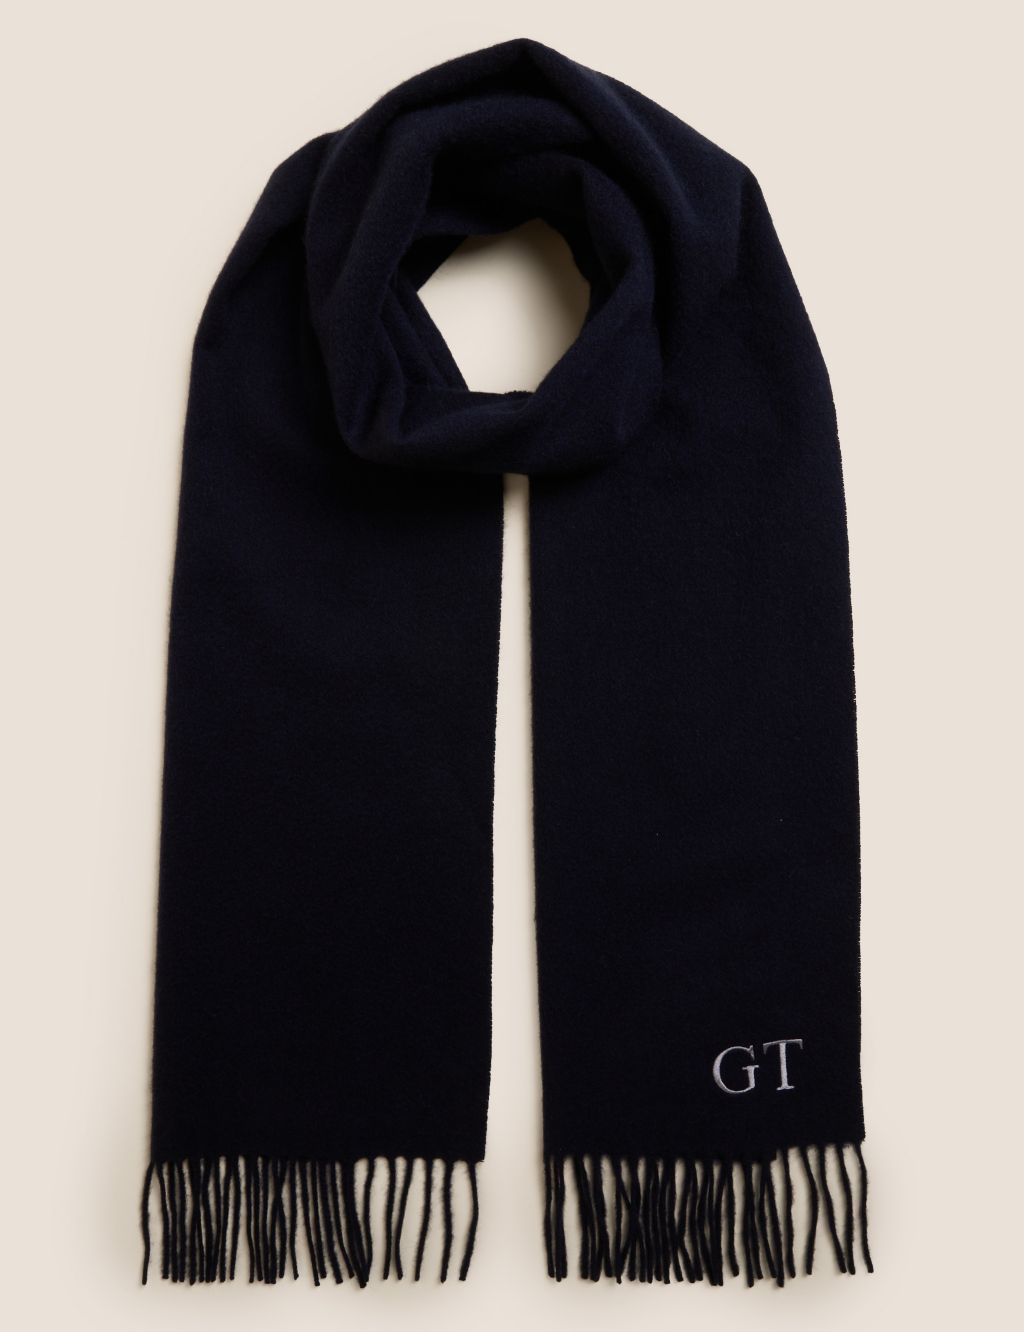 Personalised Men's Pure Cashmere Scarf image 1